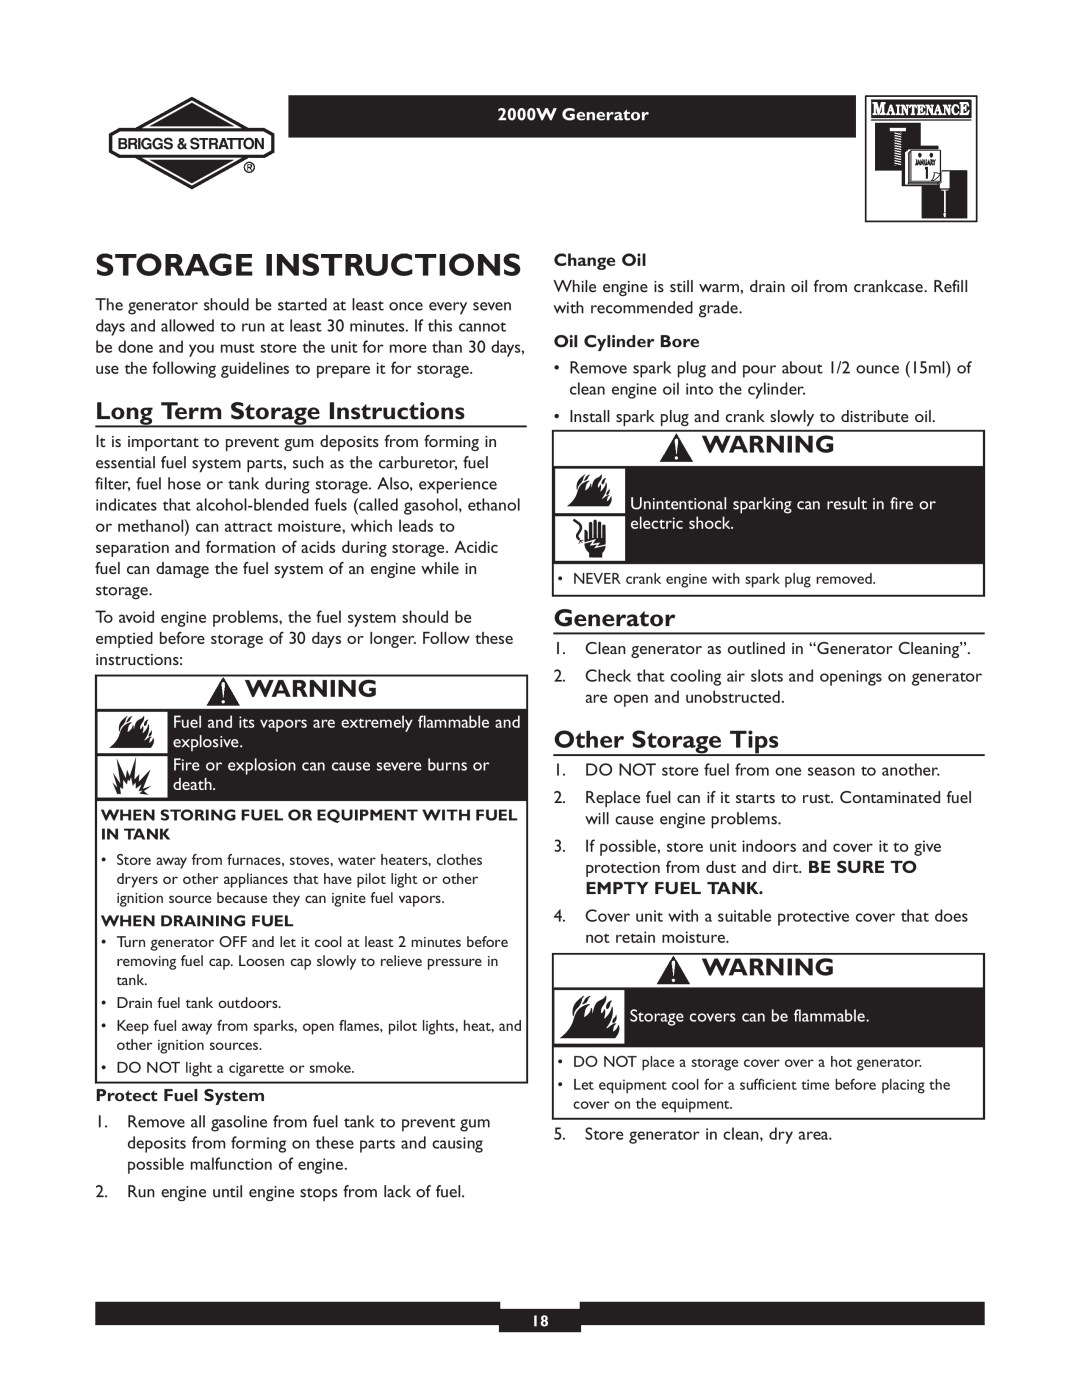 Briggs & Stratton 30239 Long Term Storage Instructions, Generator, Other Storage Tips, Change Oil, Oil Cylinder Bore 